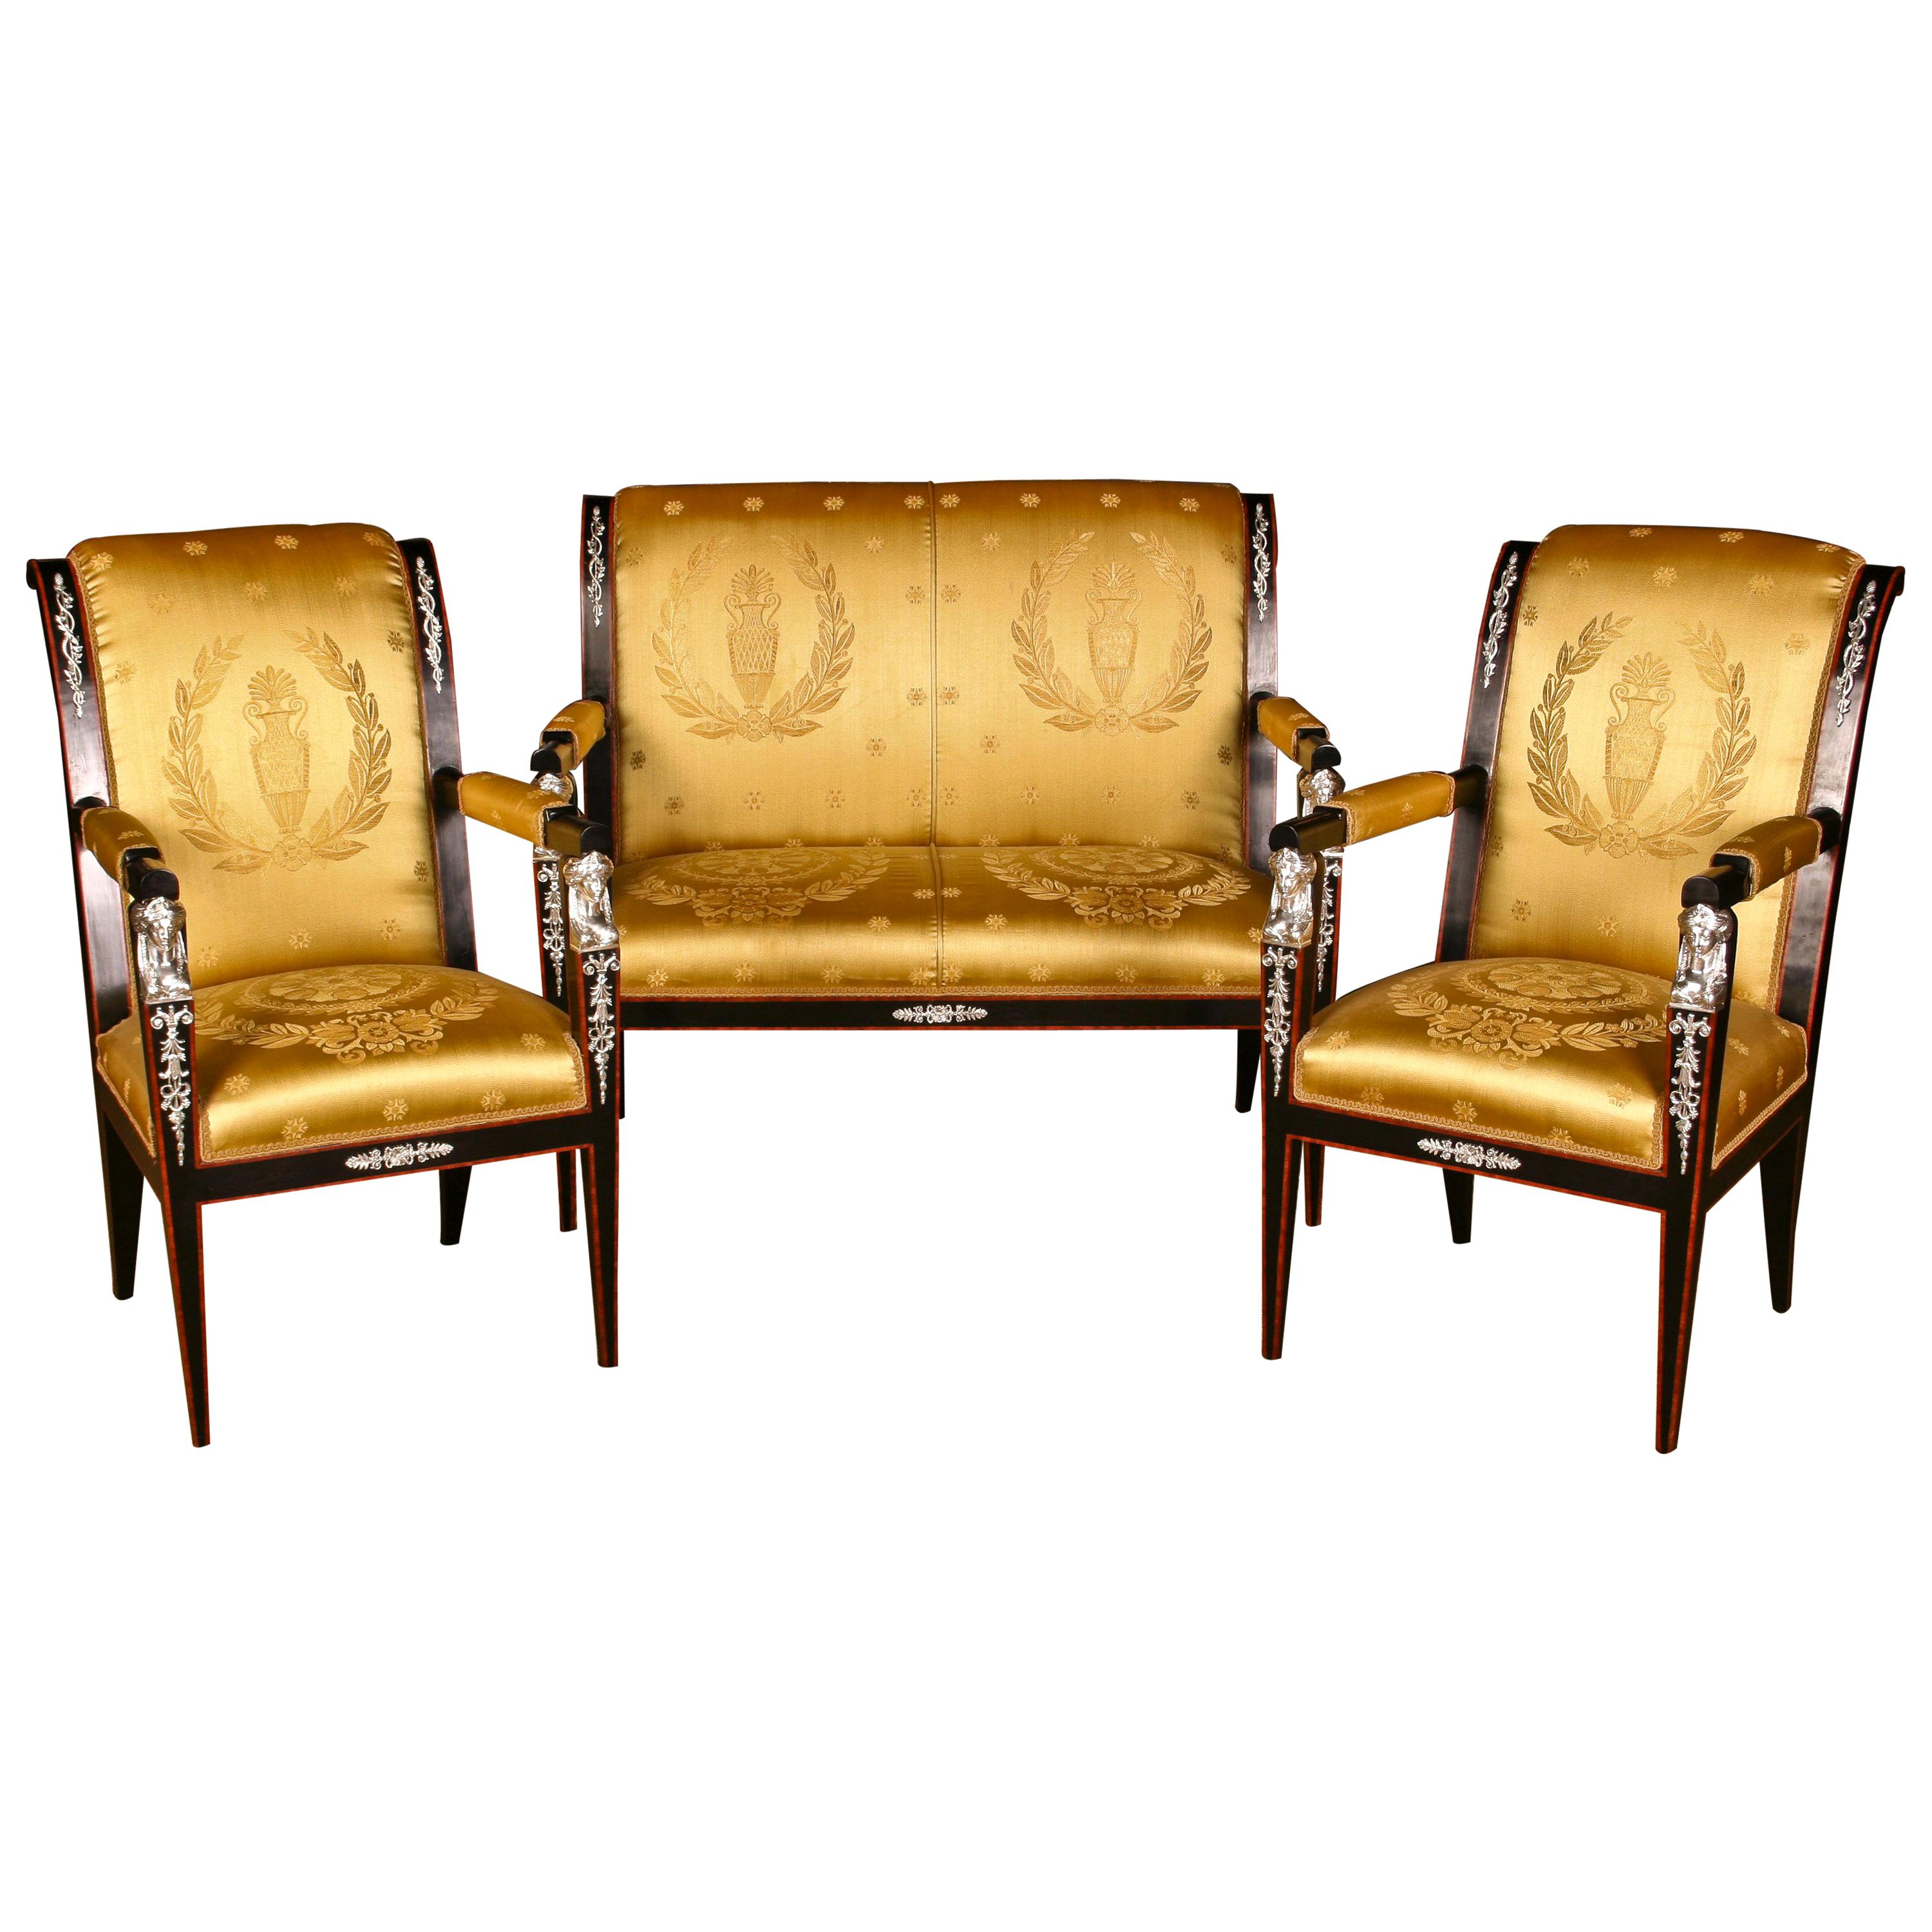 20th Century Empire Style French Garniture Living Room Sets For Sale